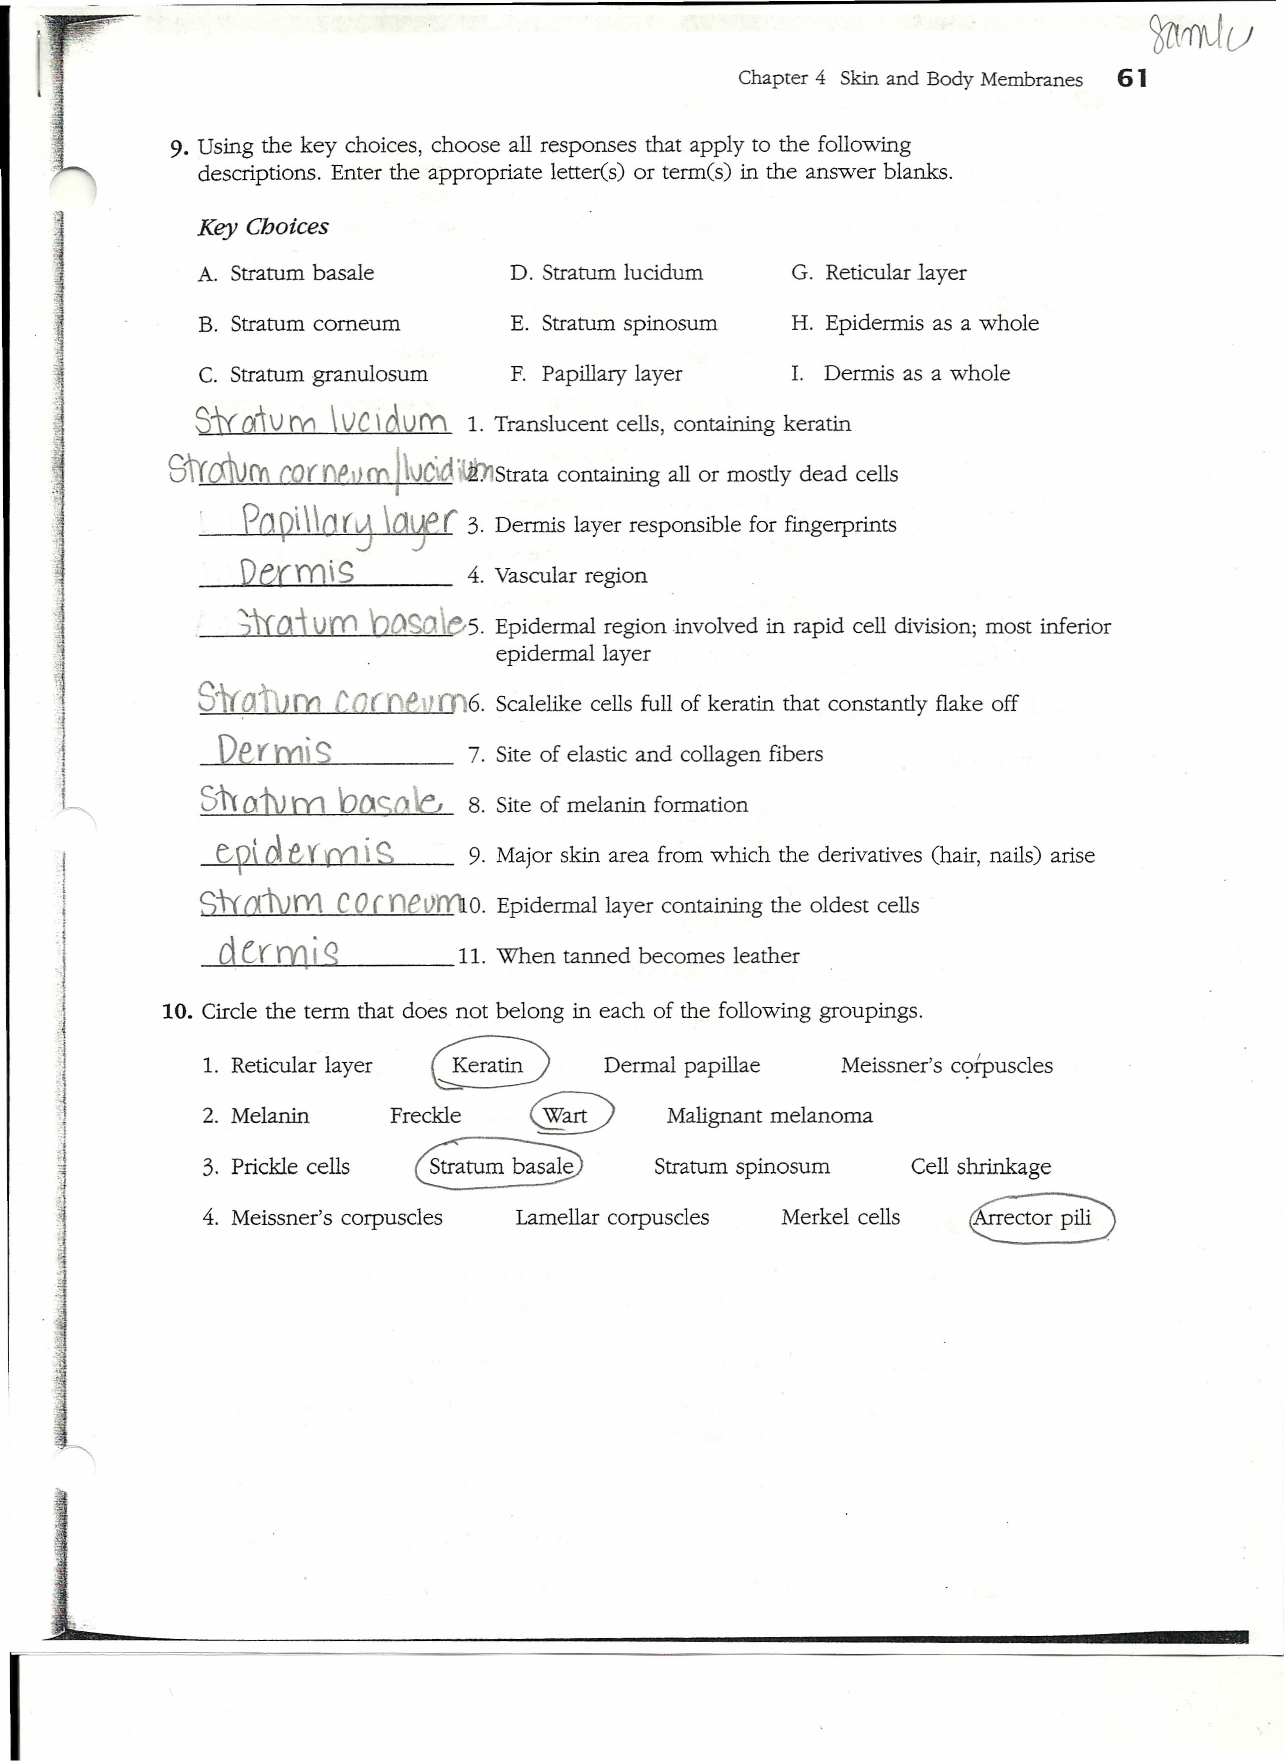 Anatomy And Physiology Coloring Workbook Answers